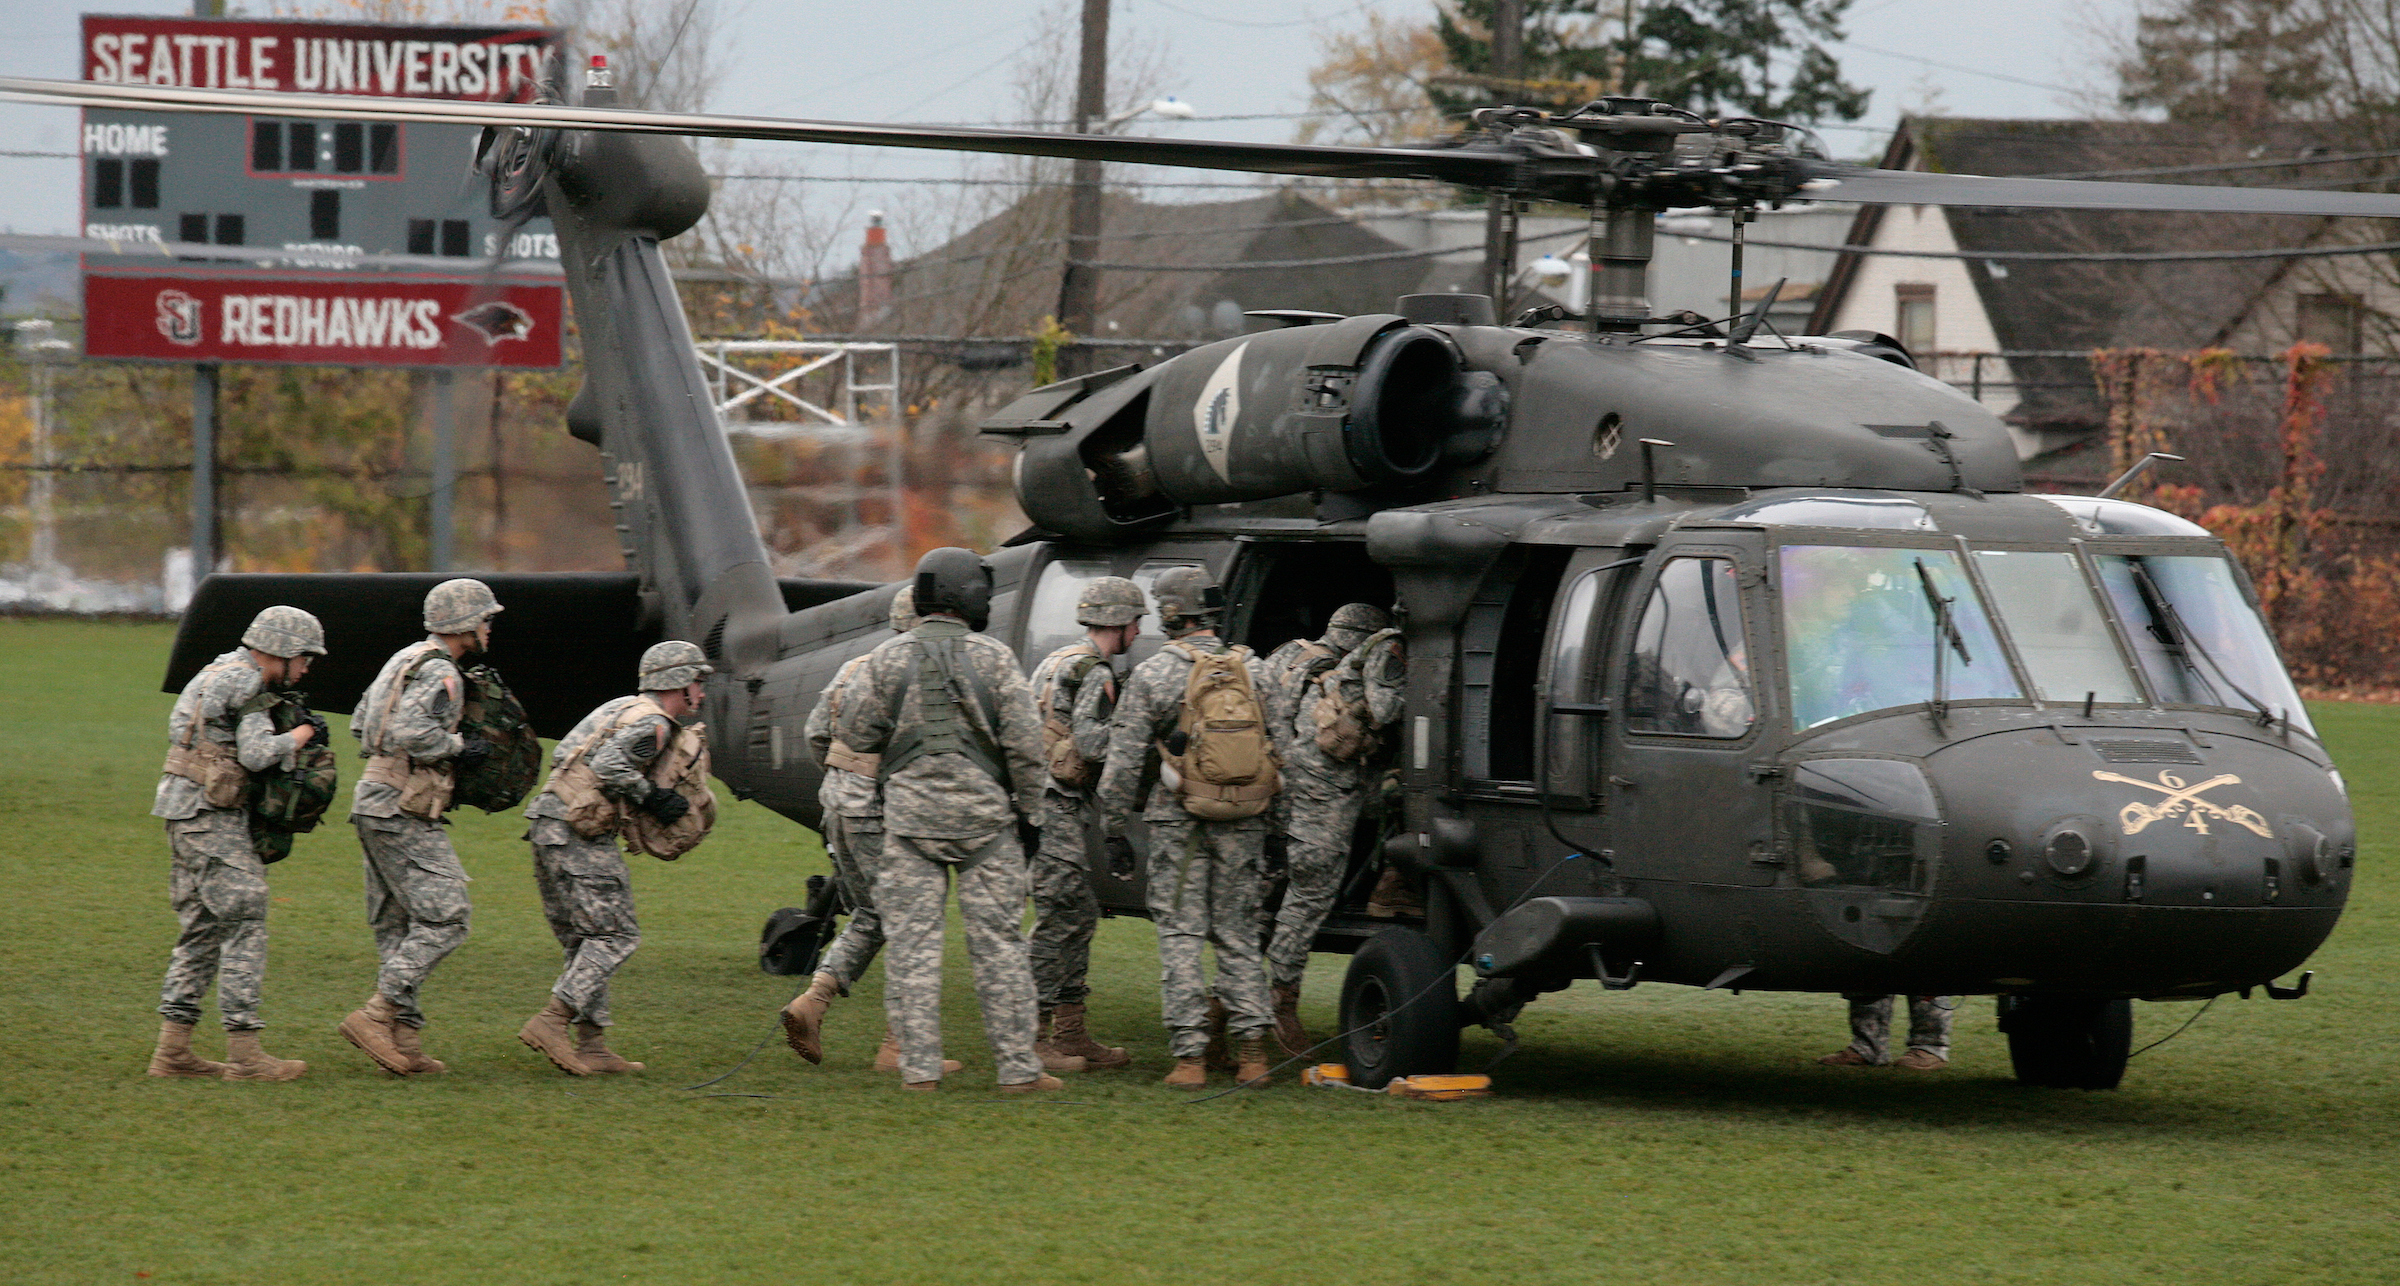 Cadets and Blackhawk Helicopter on Championship Field